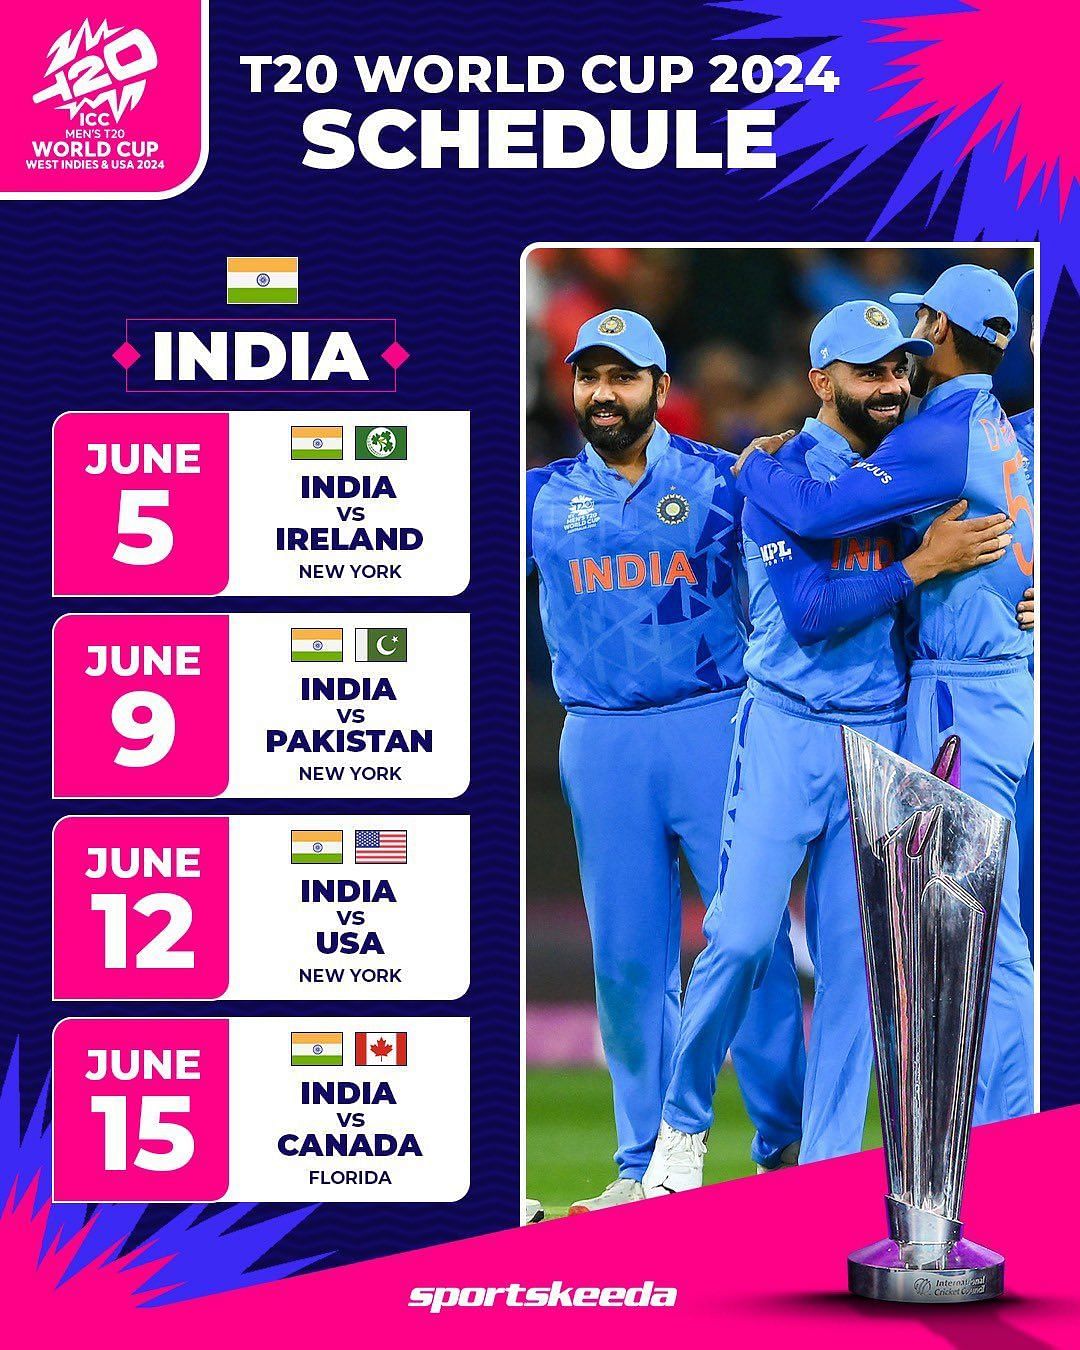 India T20 World Cup 2024 Schedule